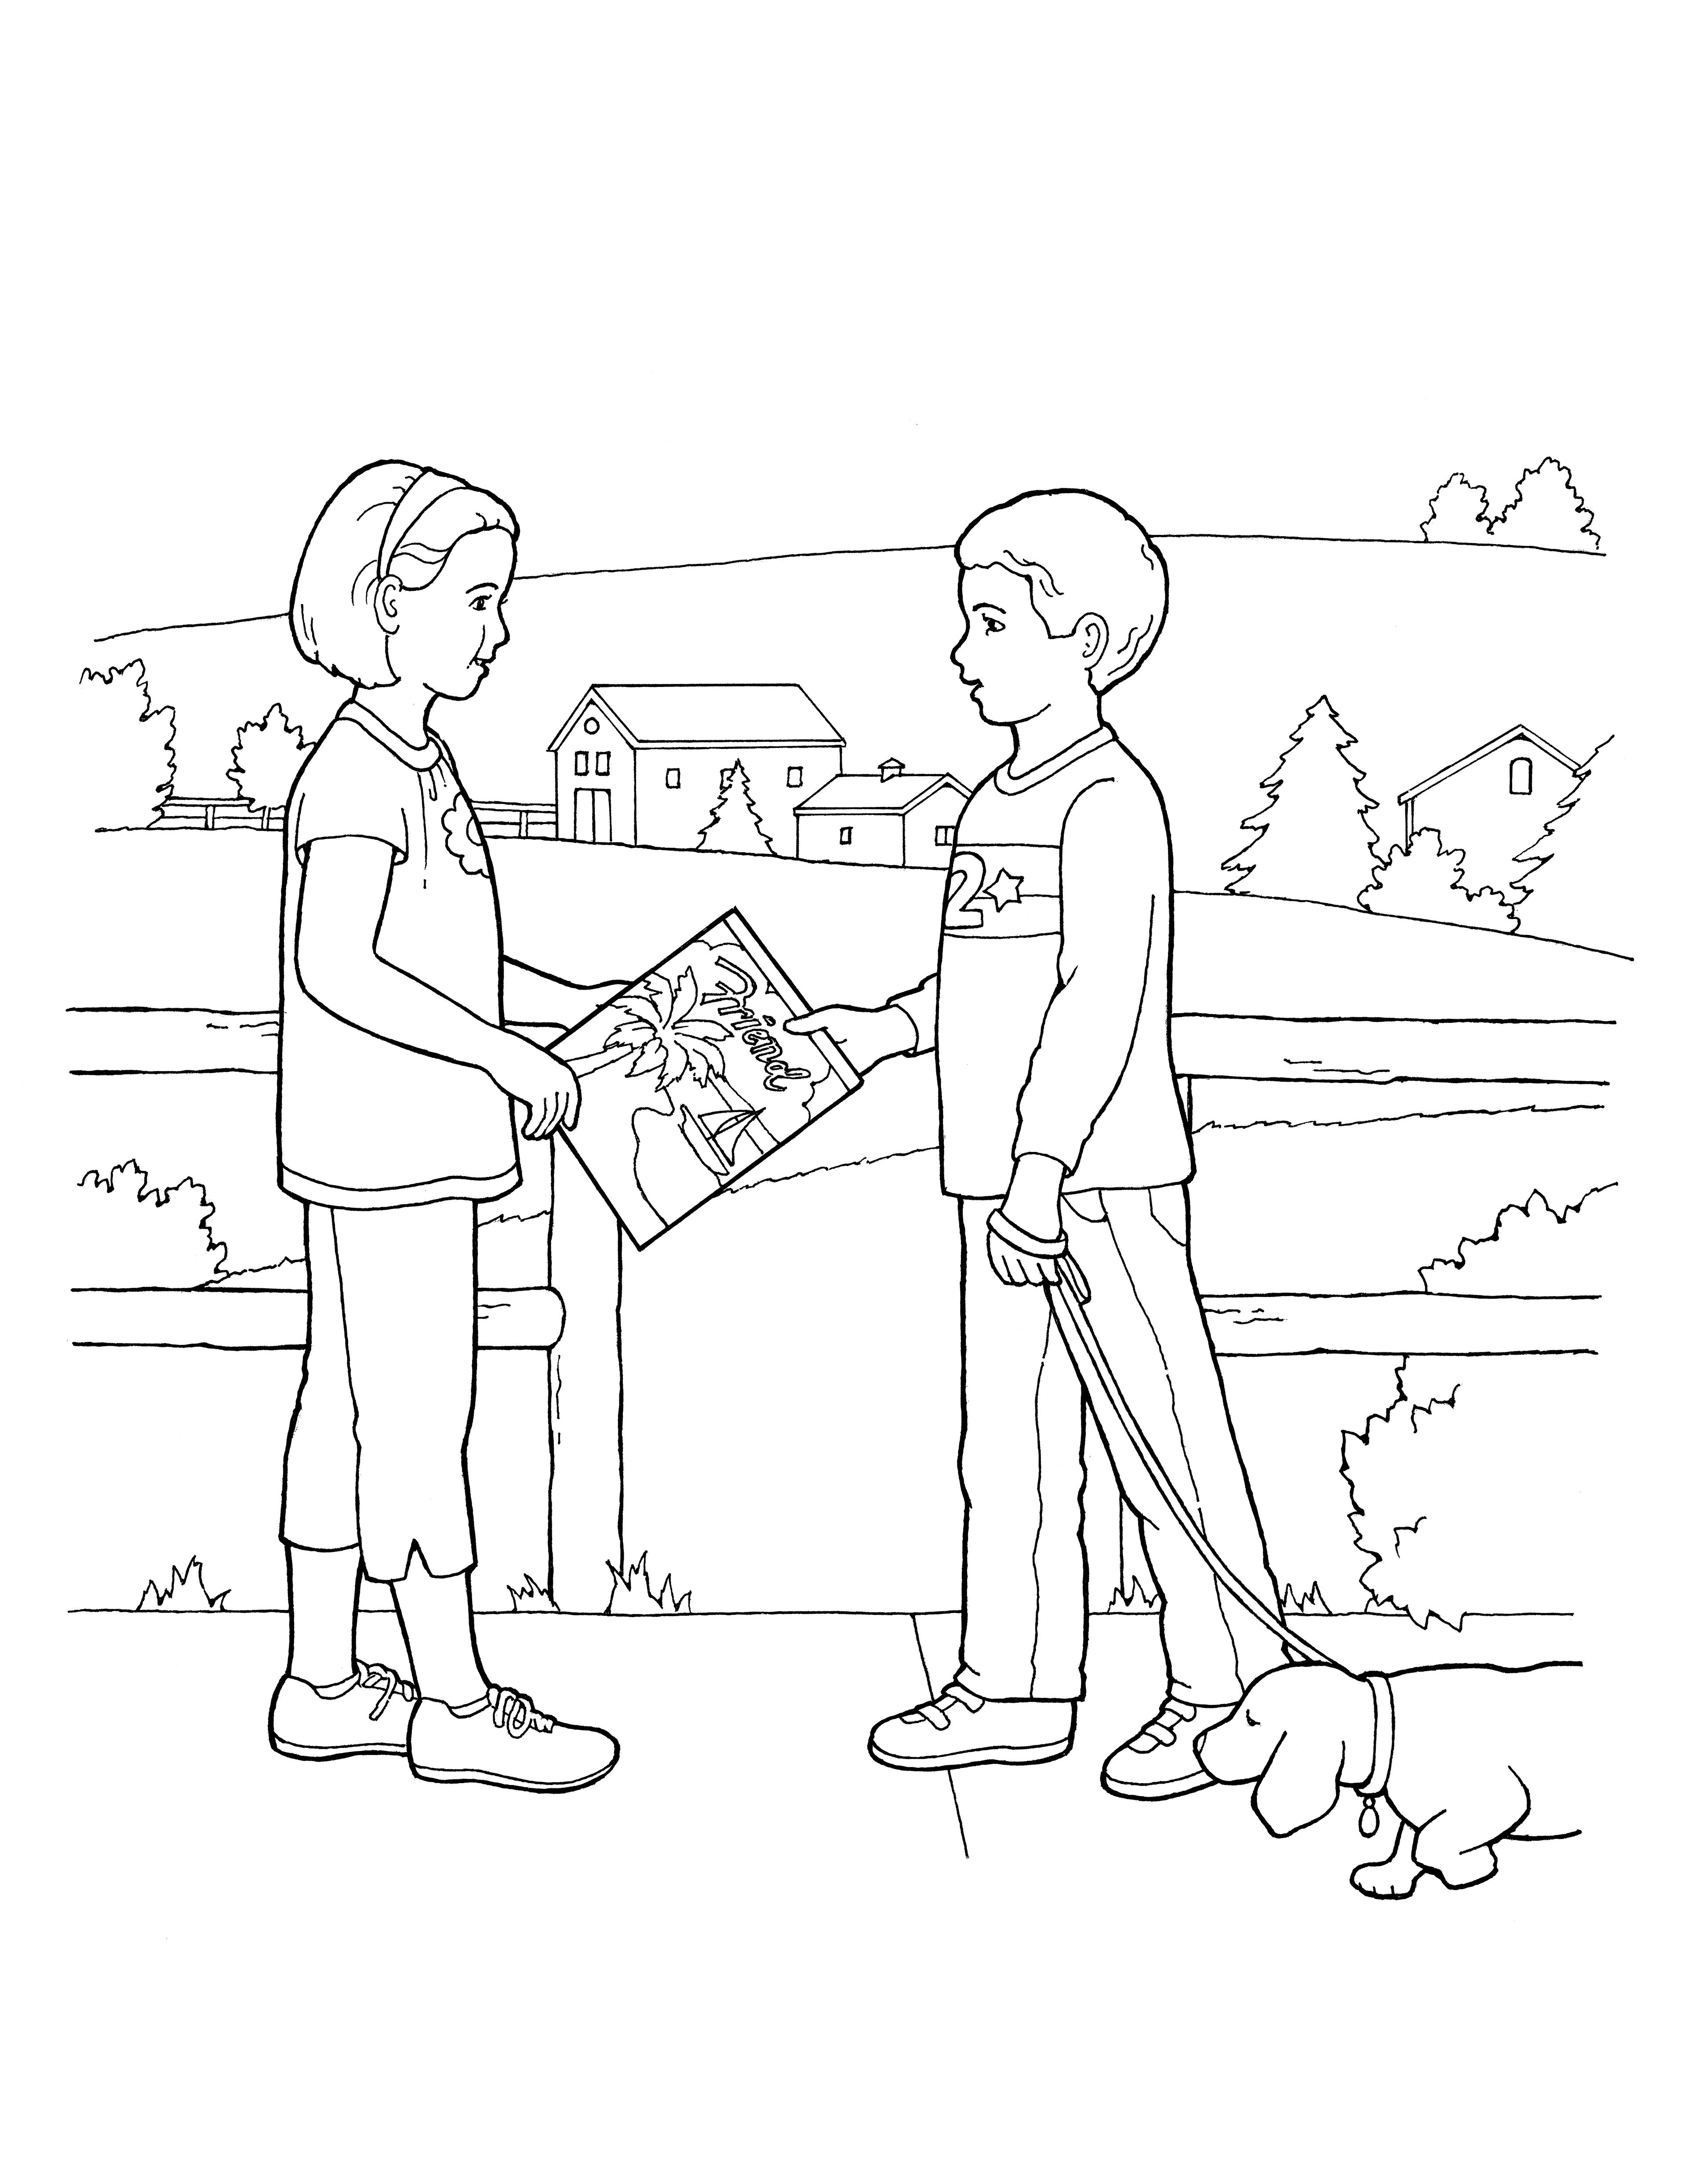 An image of children holding a Friend magazine while walking a dog.